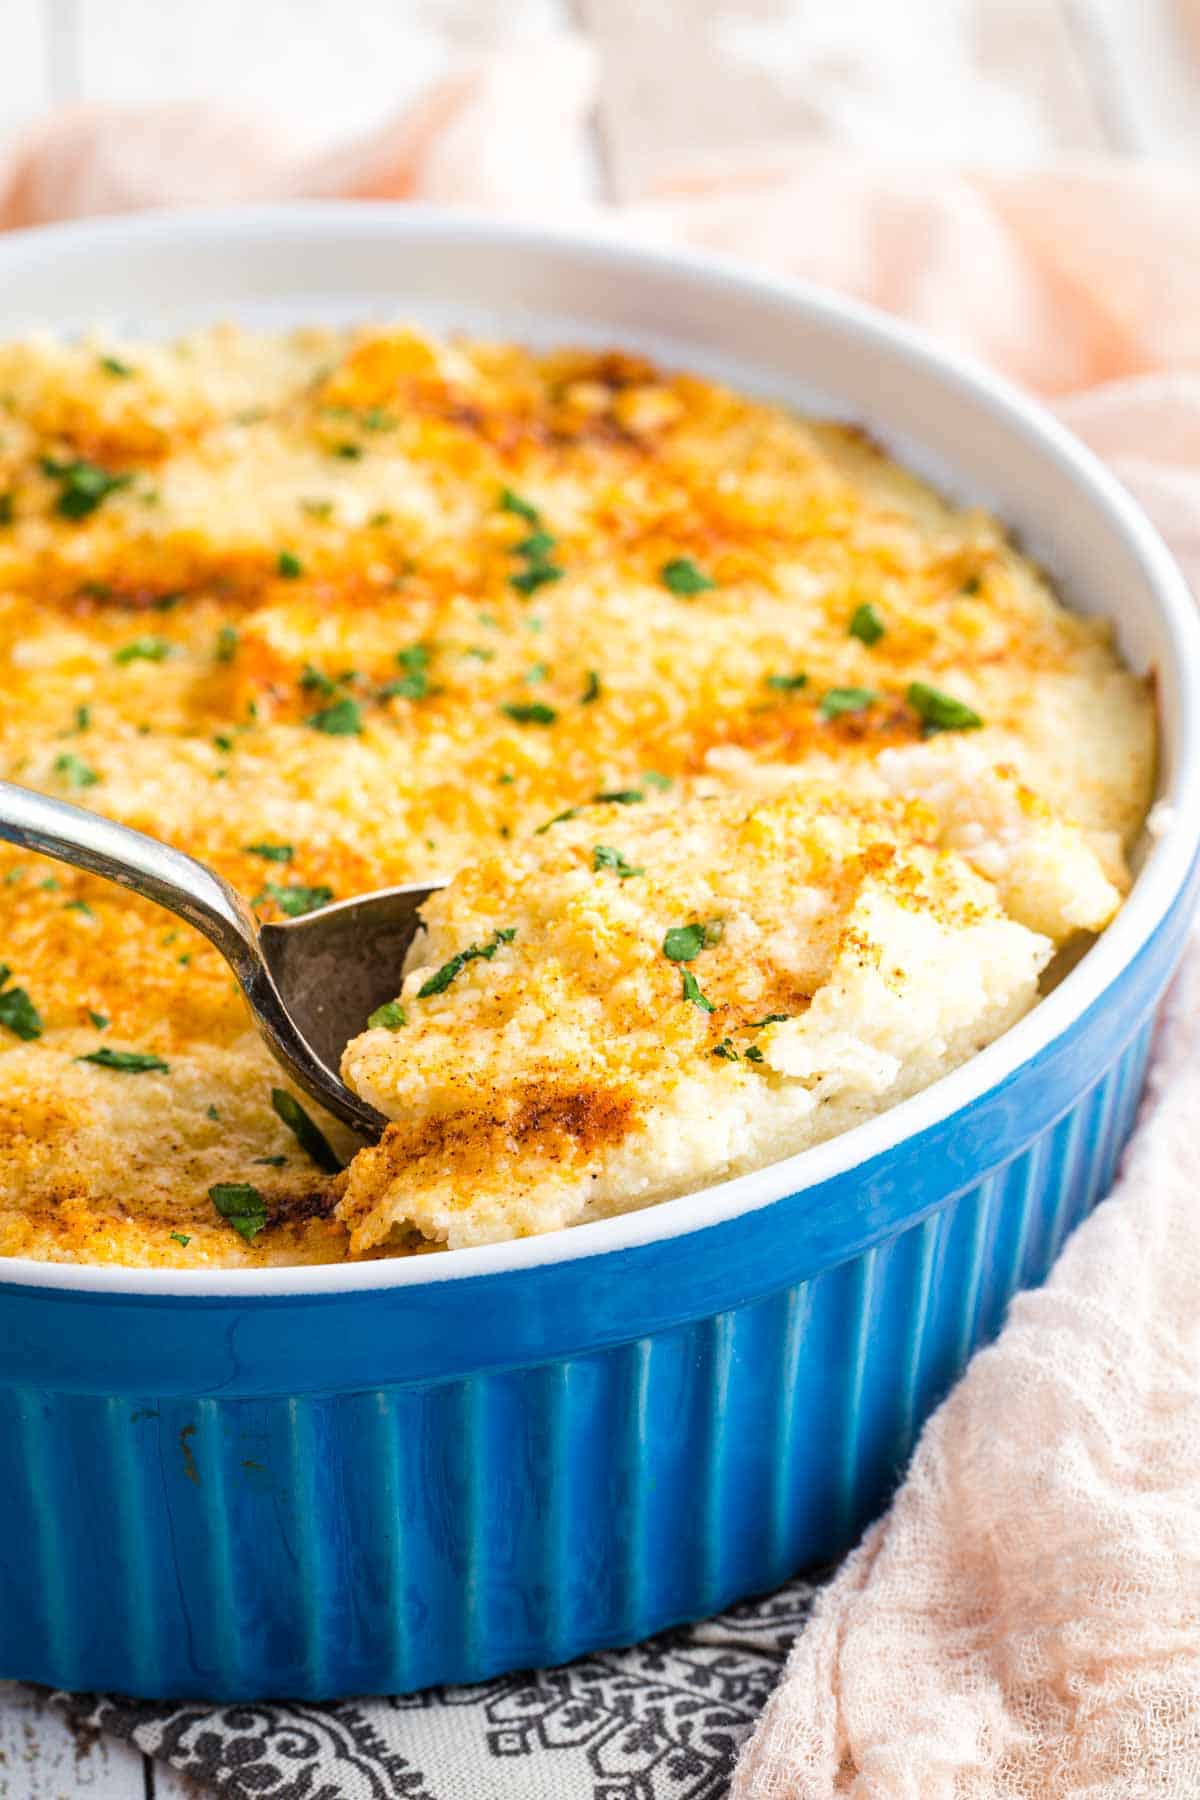 A spoon dips into a blue casserole dish filled with whipped cauliflower.